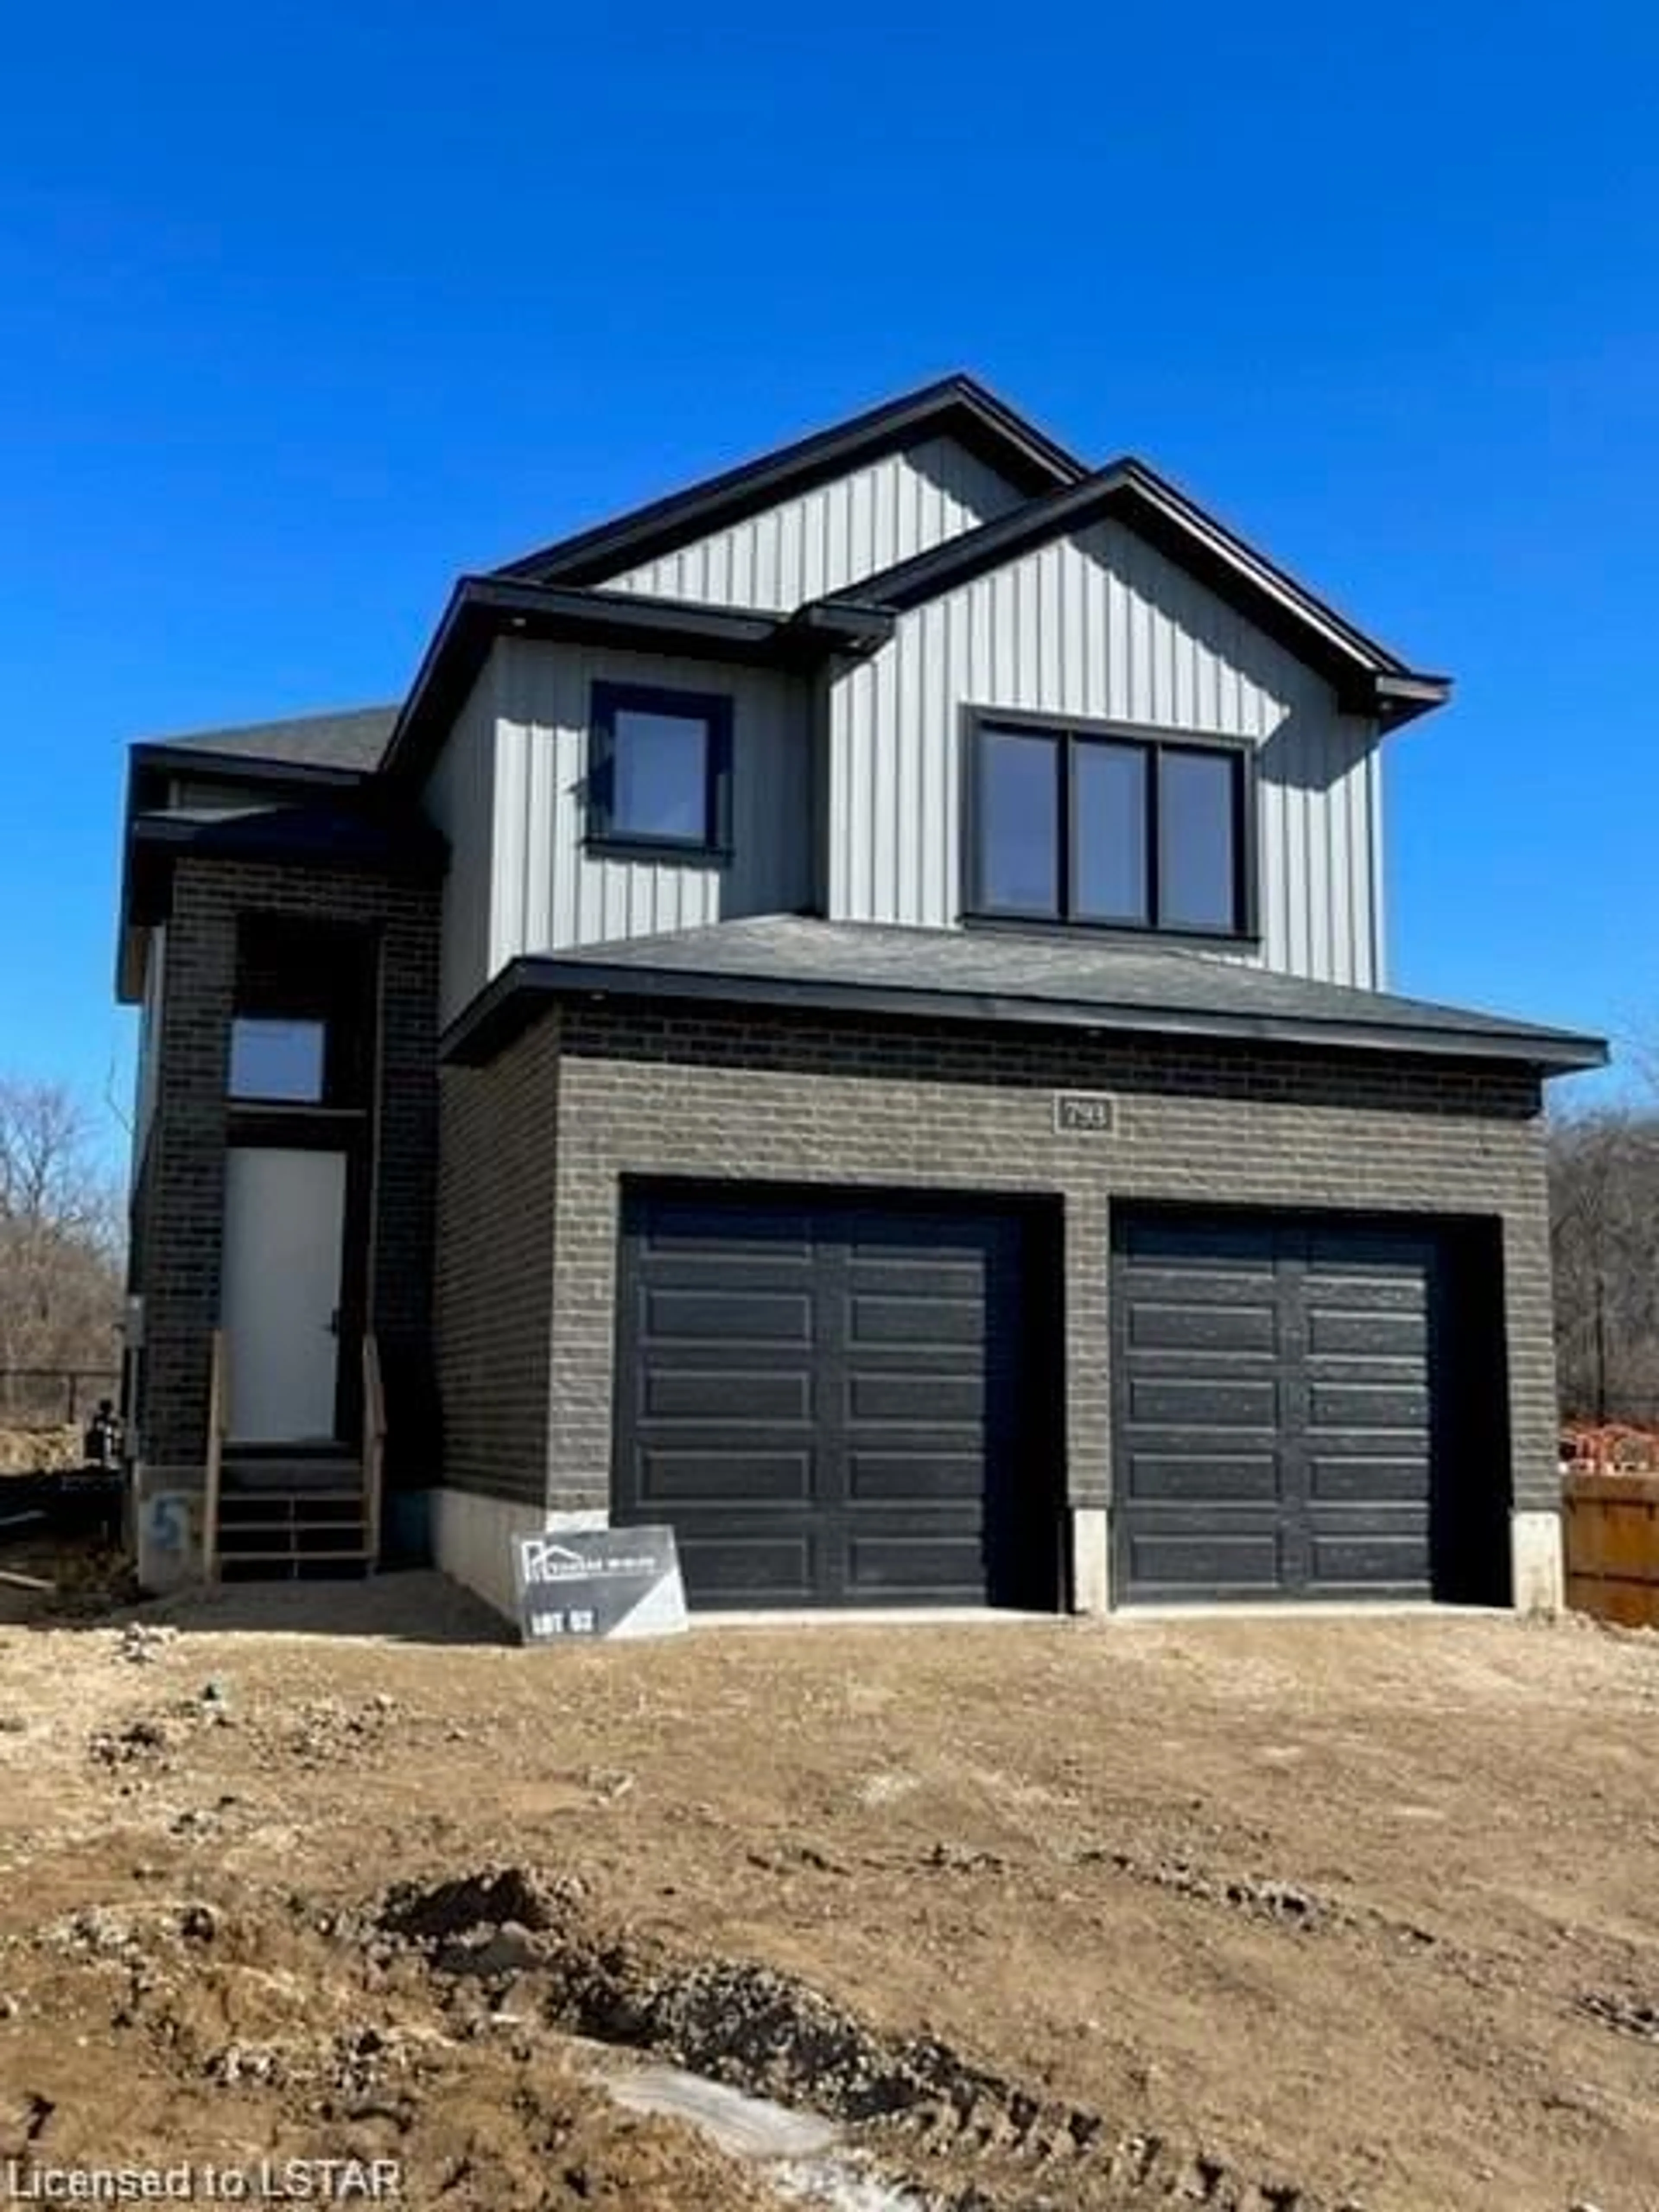 Home with brick exterior material for 1197 Honeywood Dr, London Ontario N6M 1C1